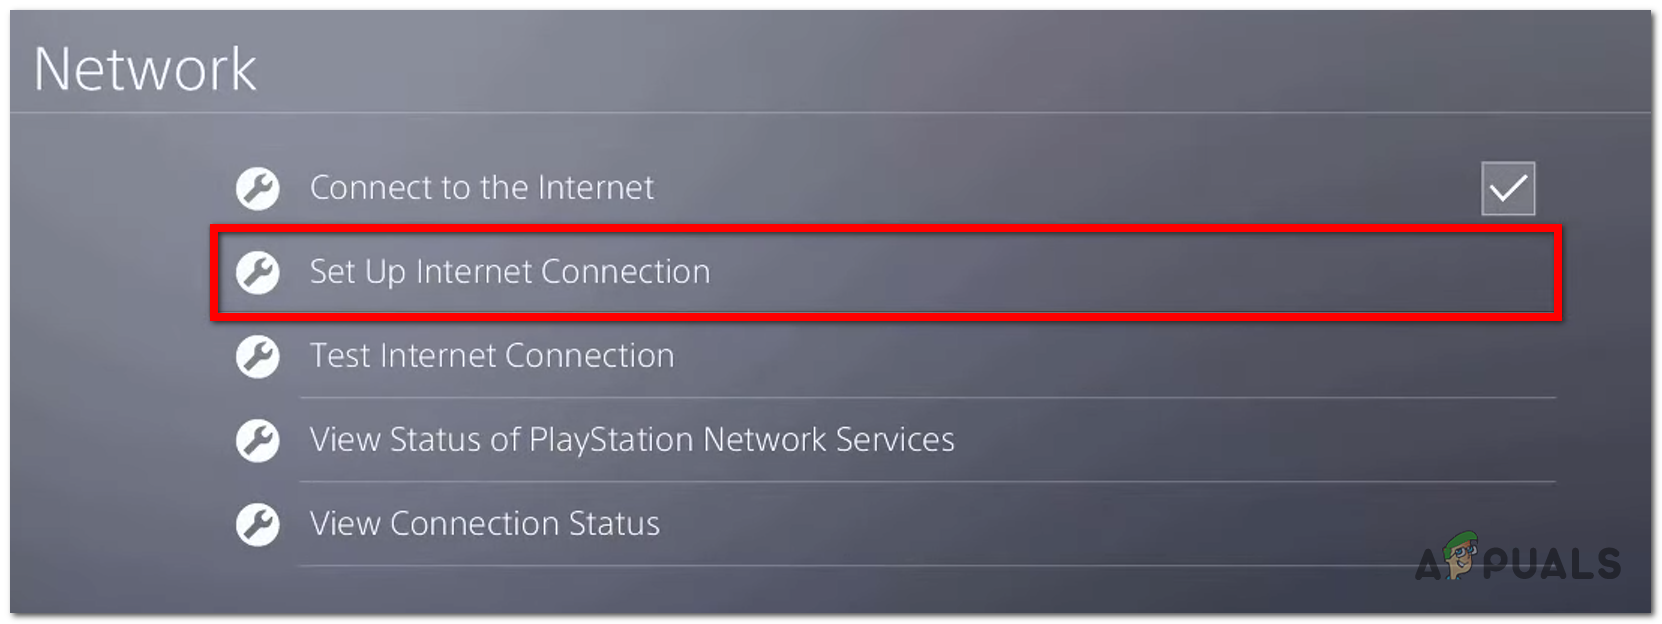 Setting up a internet connection